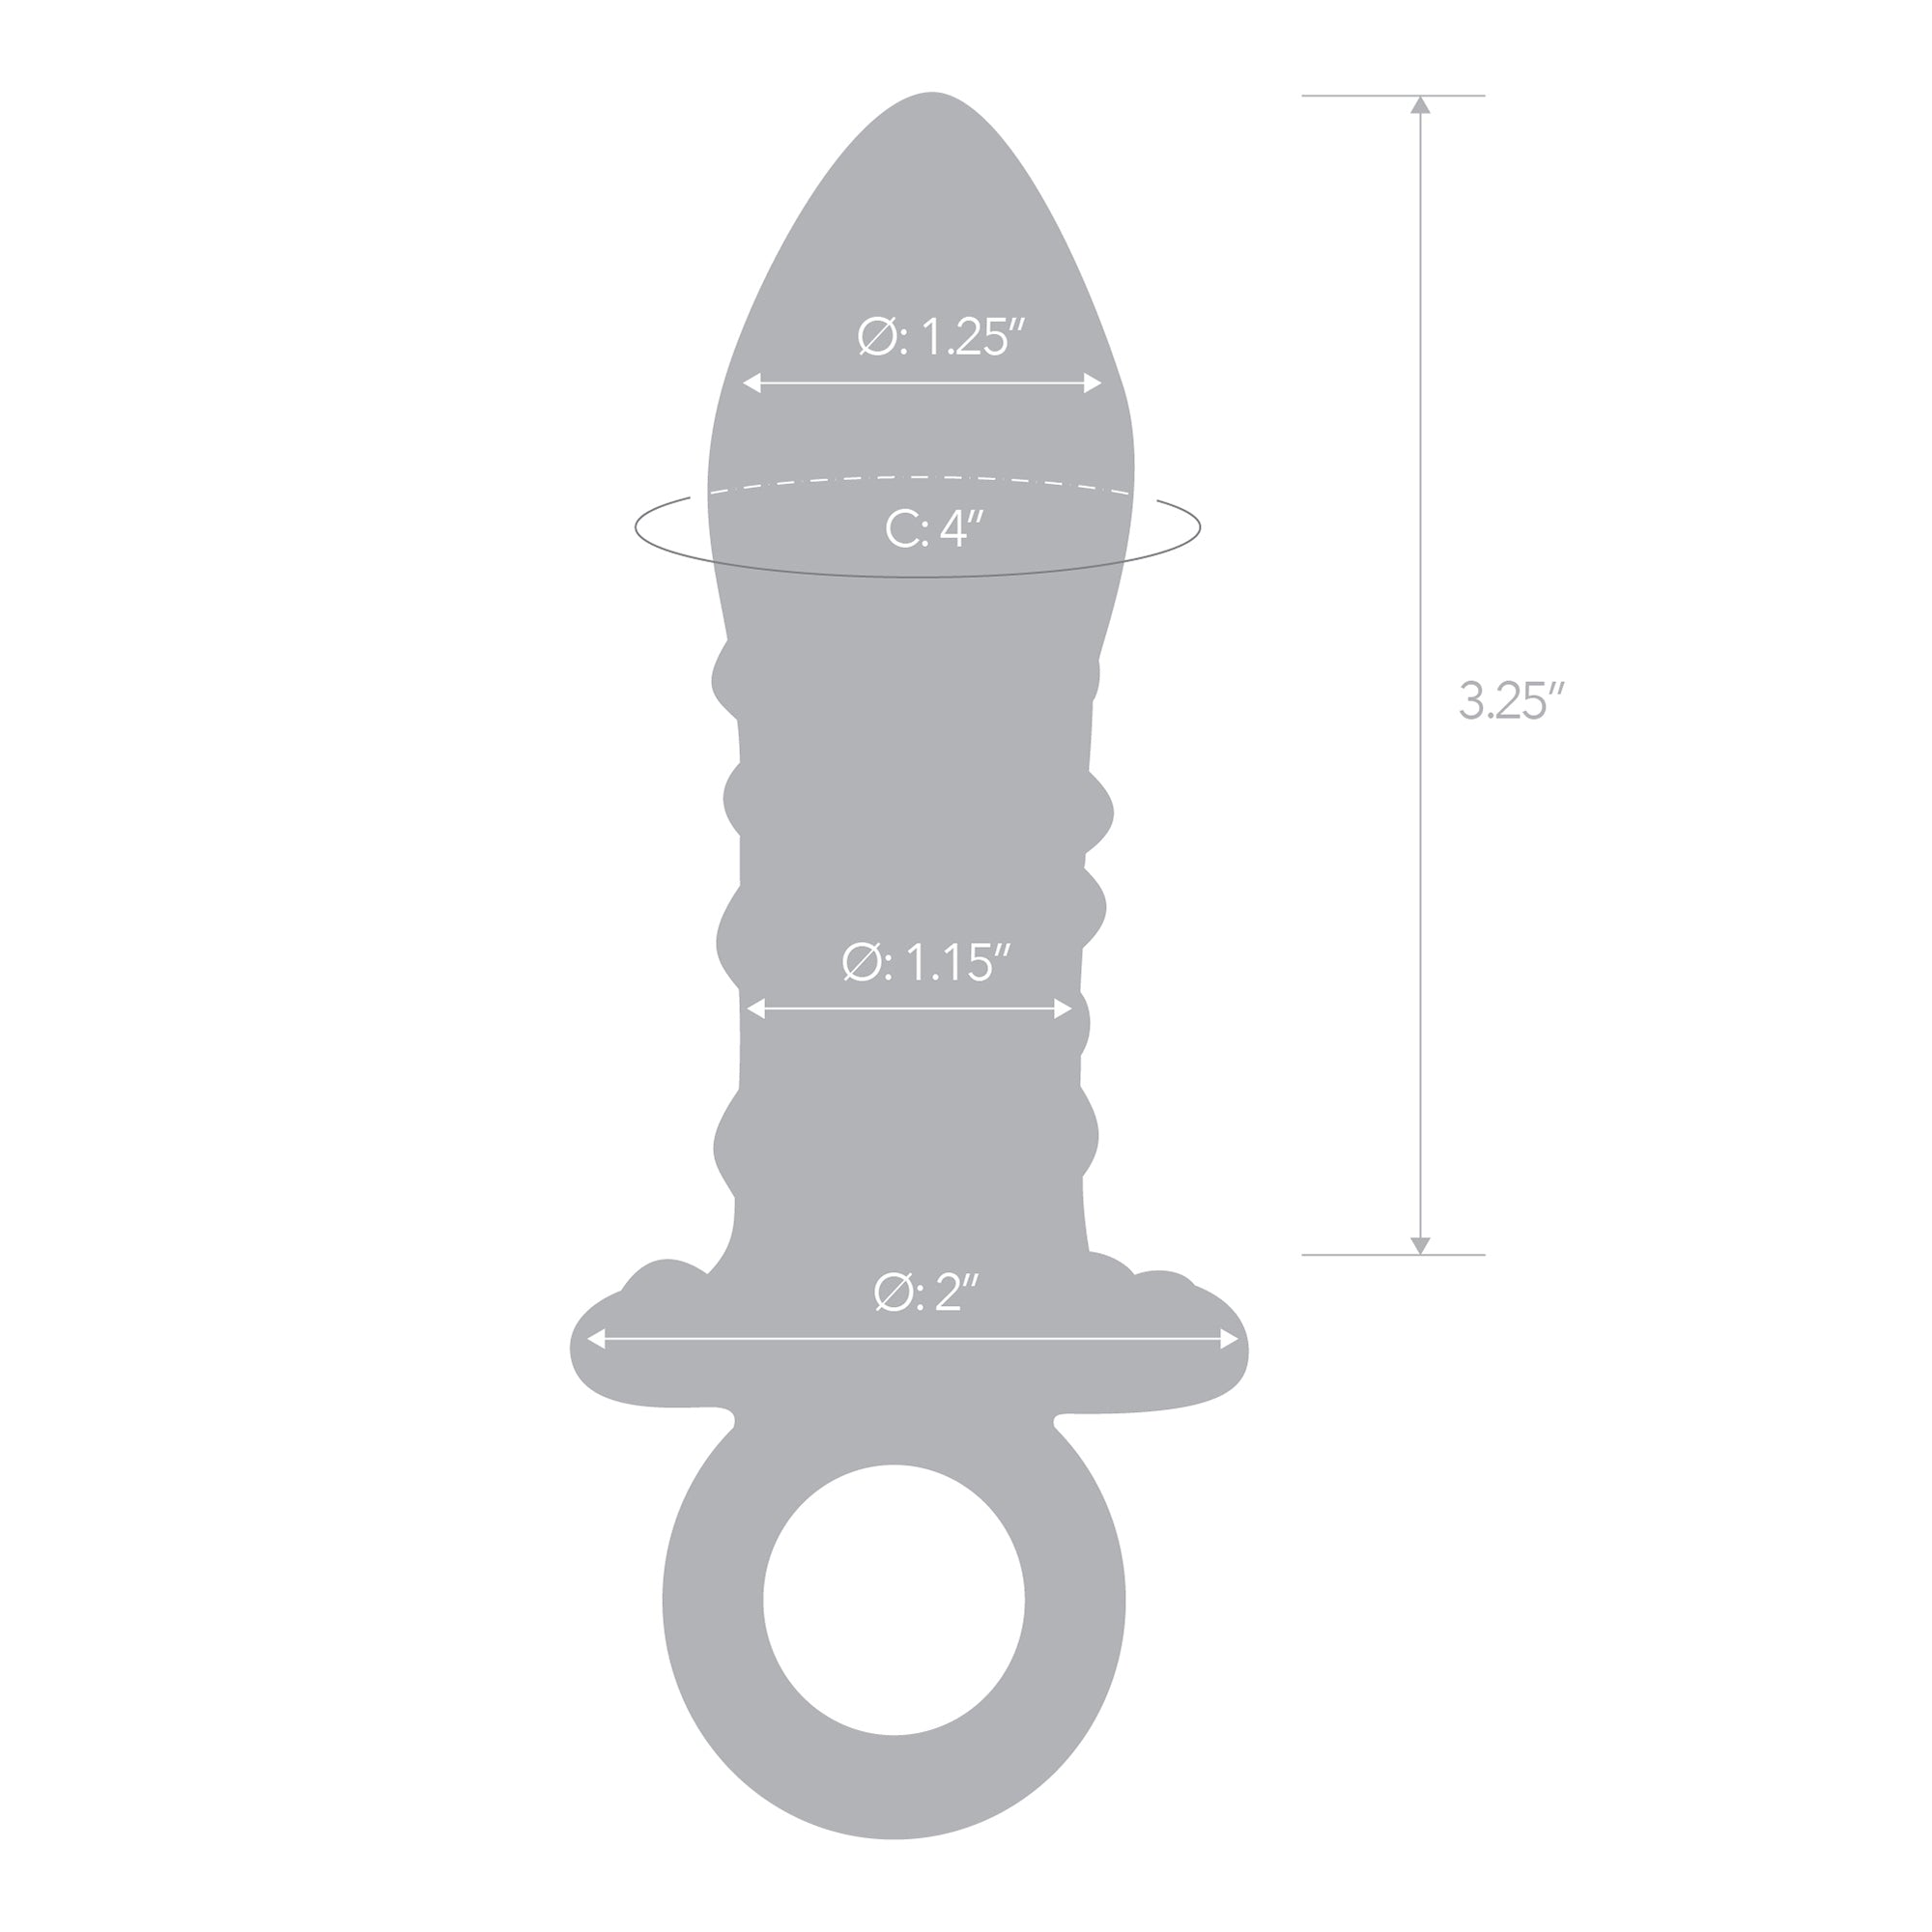 Specifications of the Gläs Pacifier Glass Butt Plug